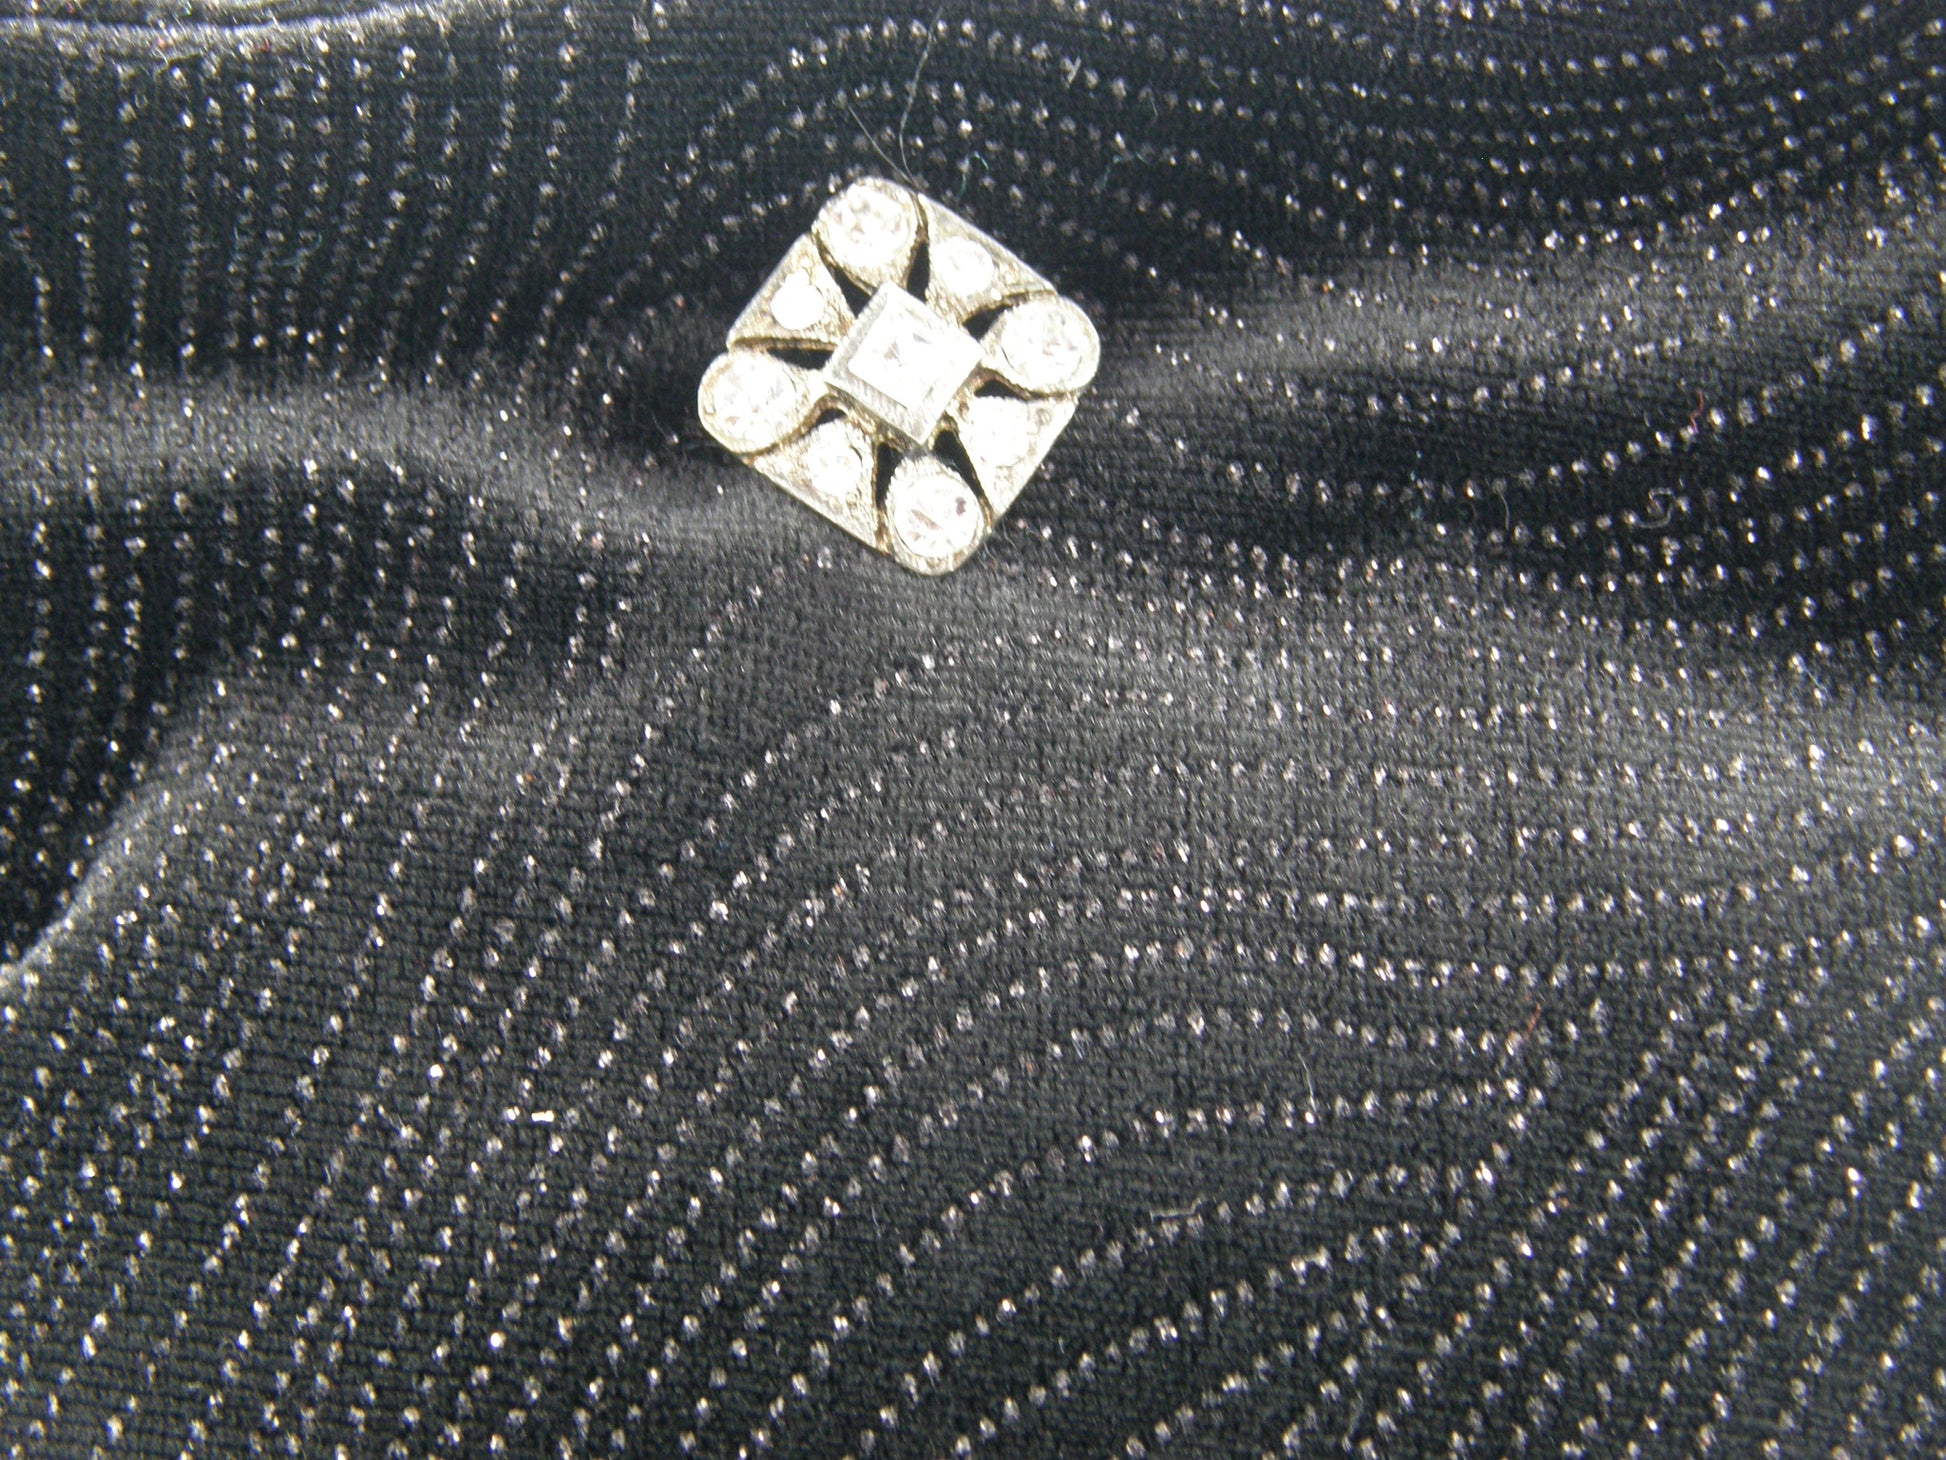 Black and Silver Evening Bag from Jenny Jag-Wear Design. Photo shows closeup image of the black holiday fabric with silver glitter. The Merle Collection from Jenny Jag-Wear Design.